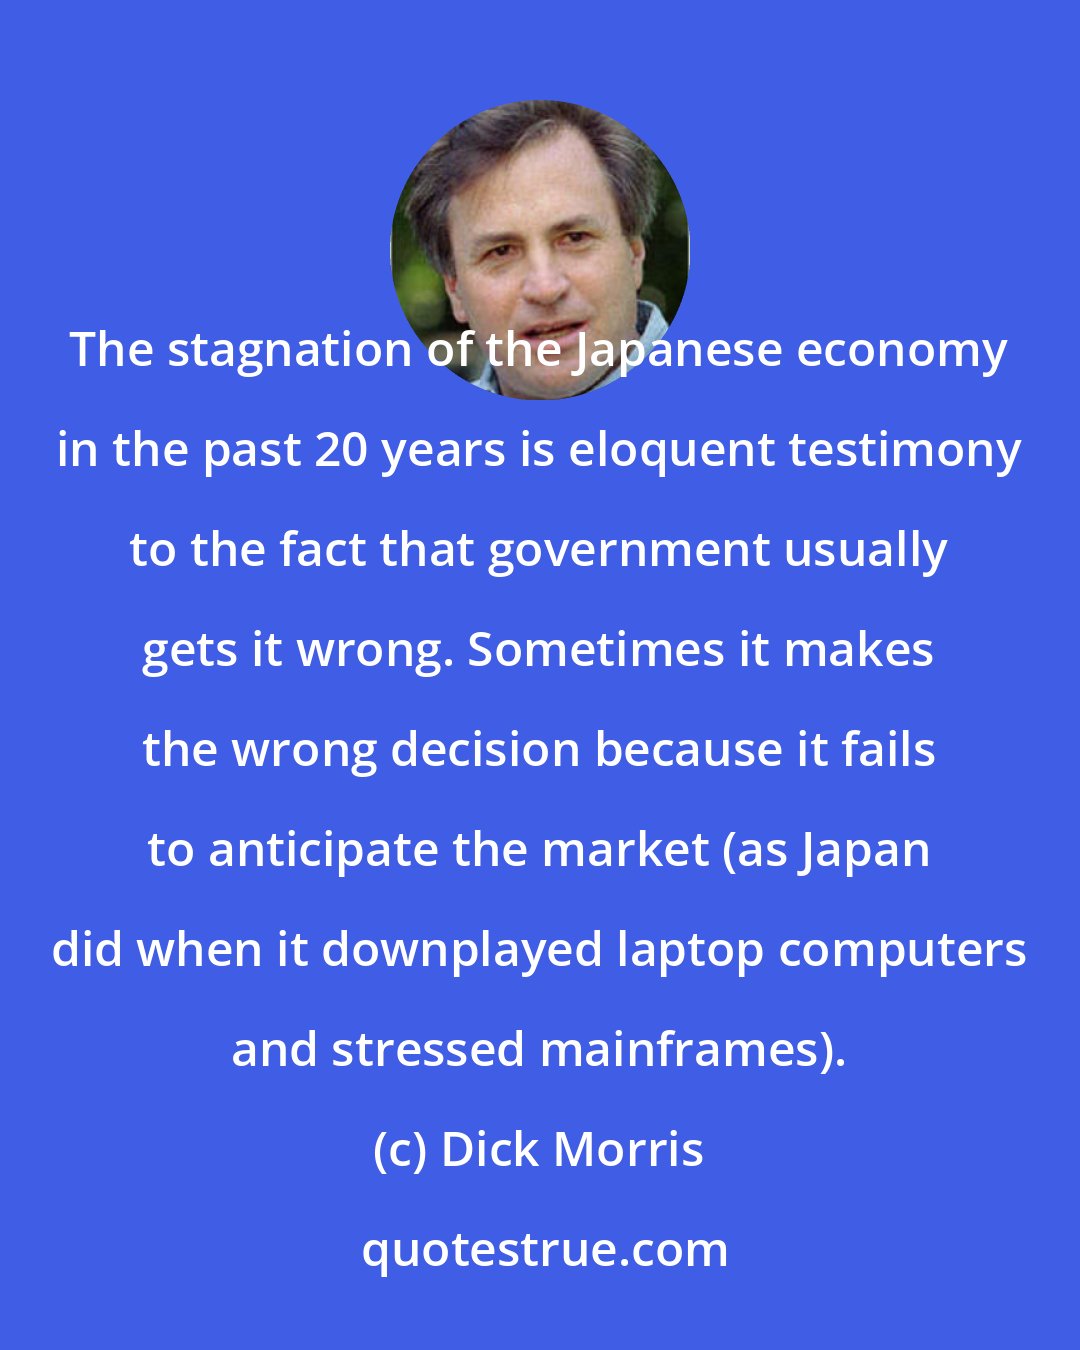 Dick Morris: The stagnation of the Japanese economy in the past 20 years is eloquent testimony to the fact that government usually gets it wrong. Sometimes it makes the wrong decision because it fails to anticipate the market (as Japan did when it downplayed laptop computers and stressed mainframes).